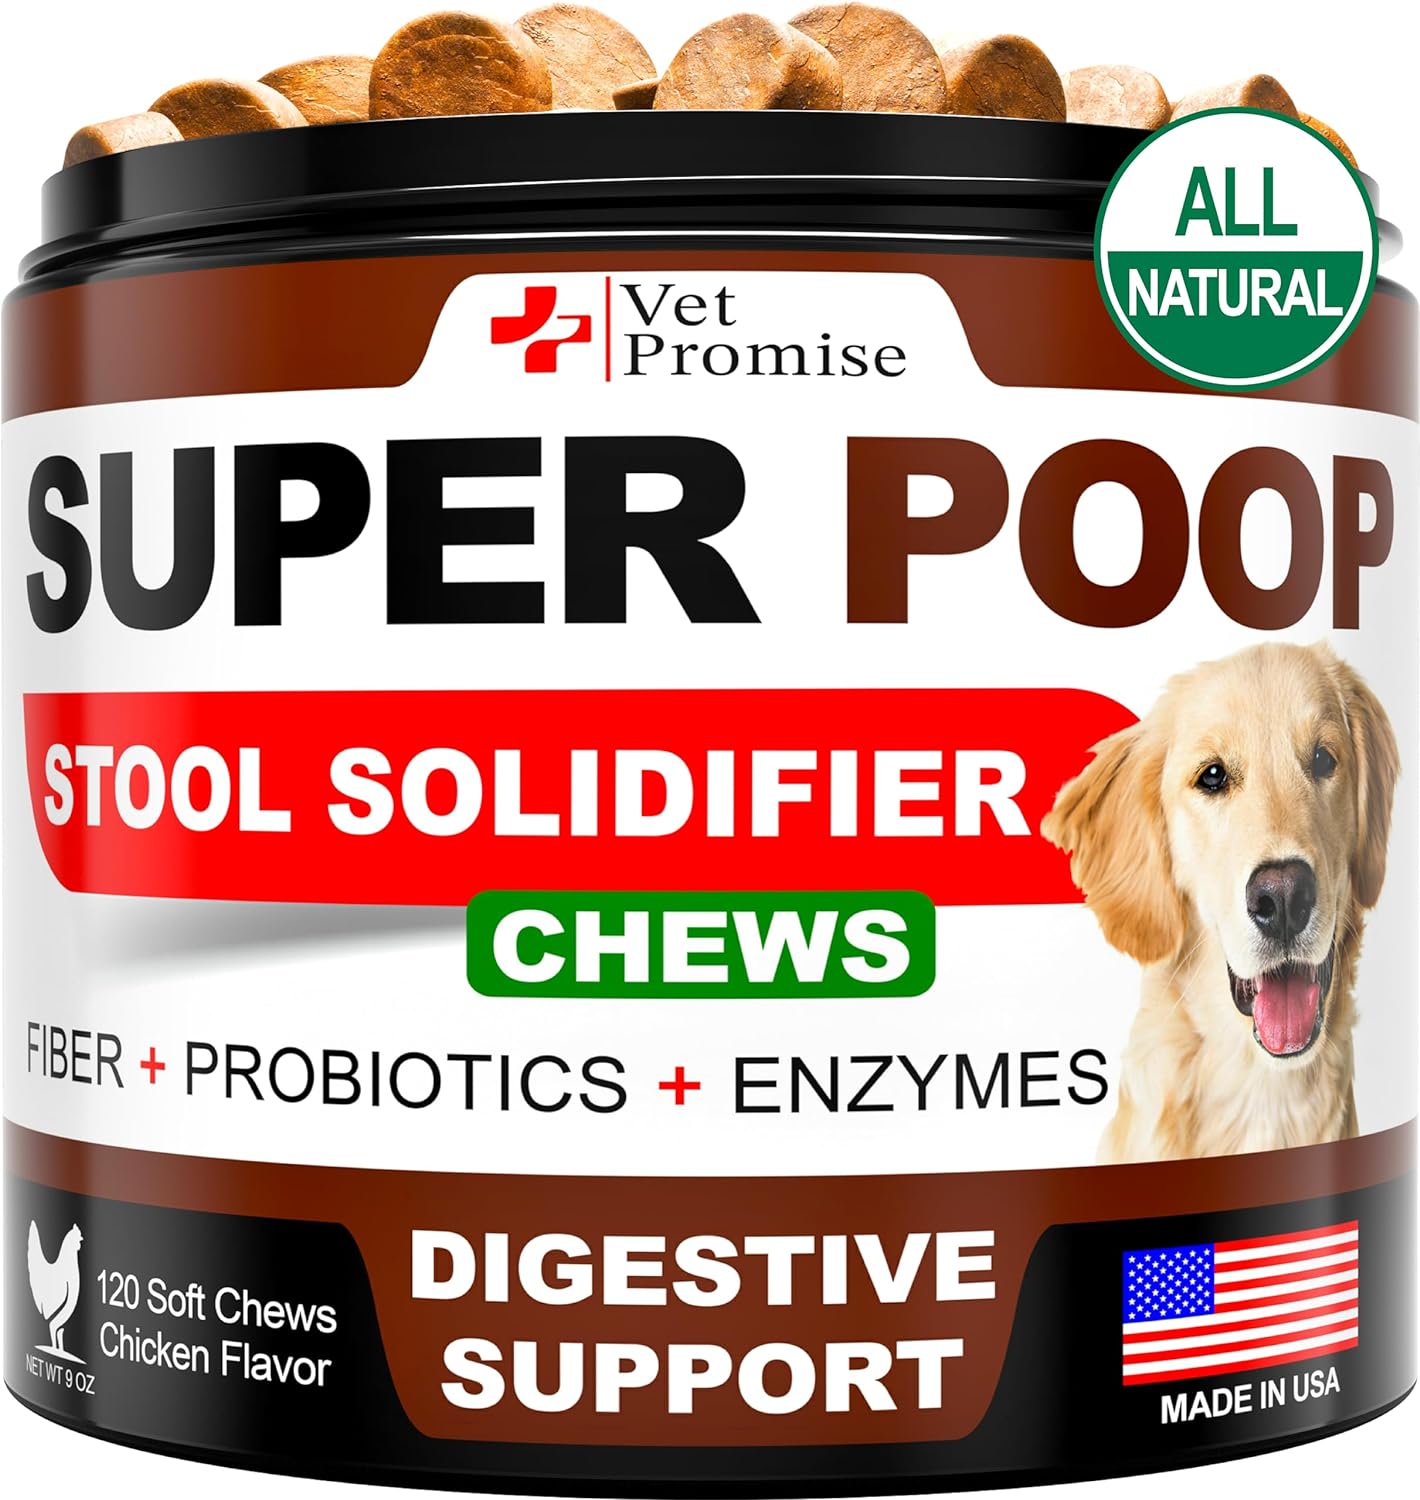 Super Poop Probiotics for Dogs - Dog Stool Softener - Fiber for Dogs Supplement - 6 Probiotics and Digestive Enzymes - Healthy Gut - Perfect for Firm Stool & Diarrhea Relief - 120 Chews